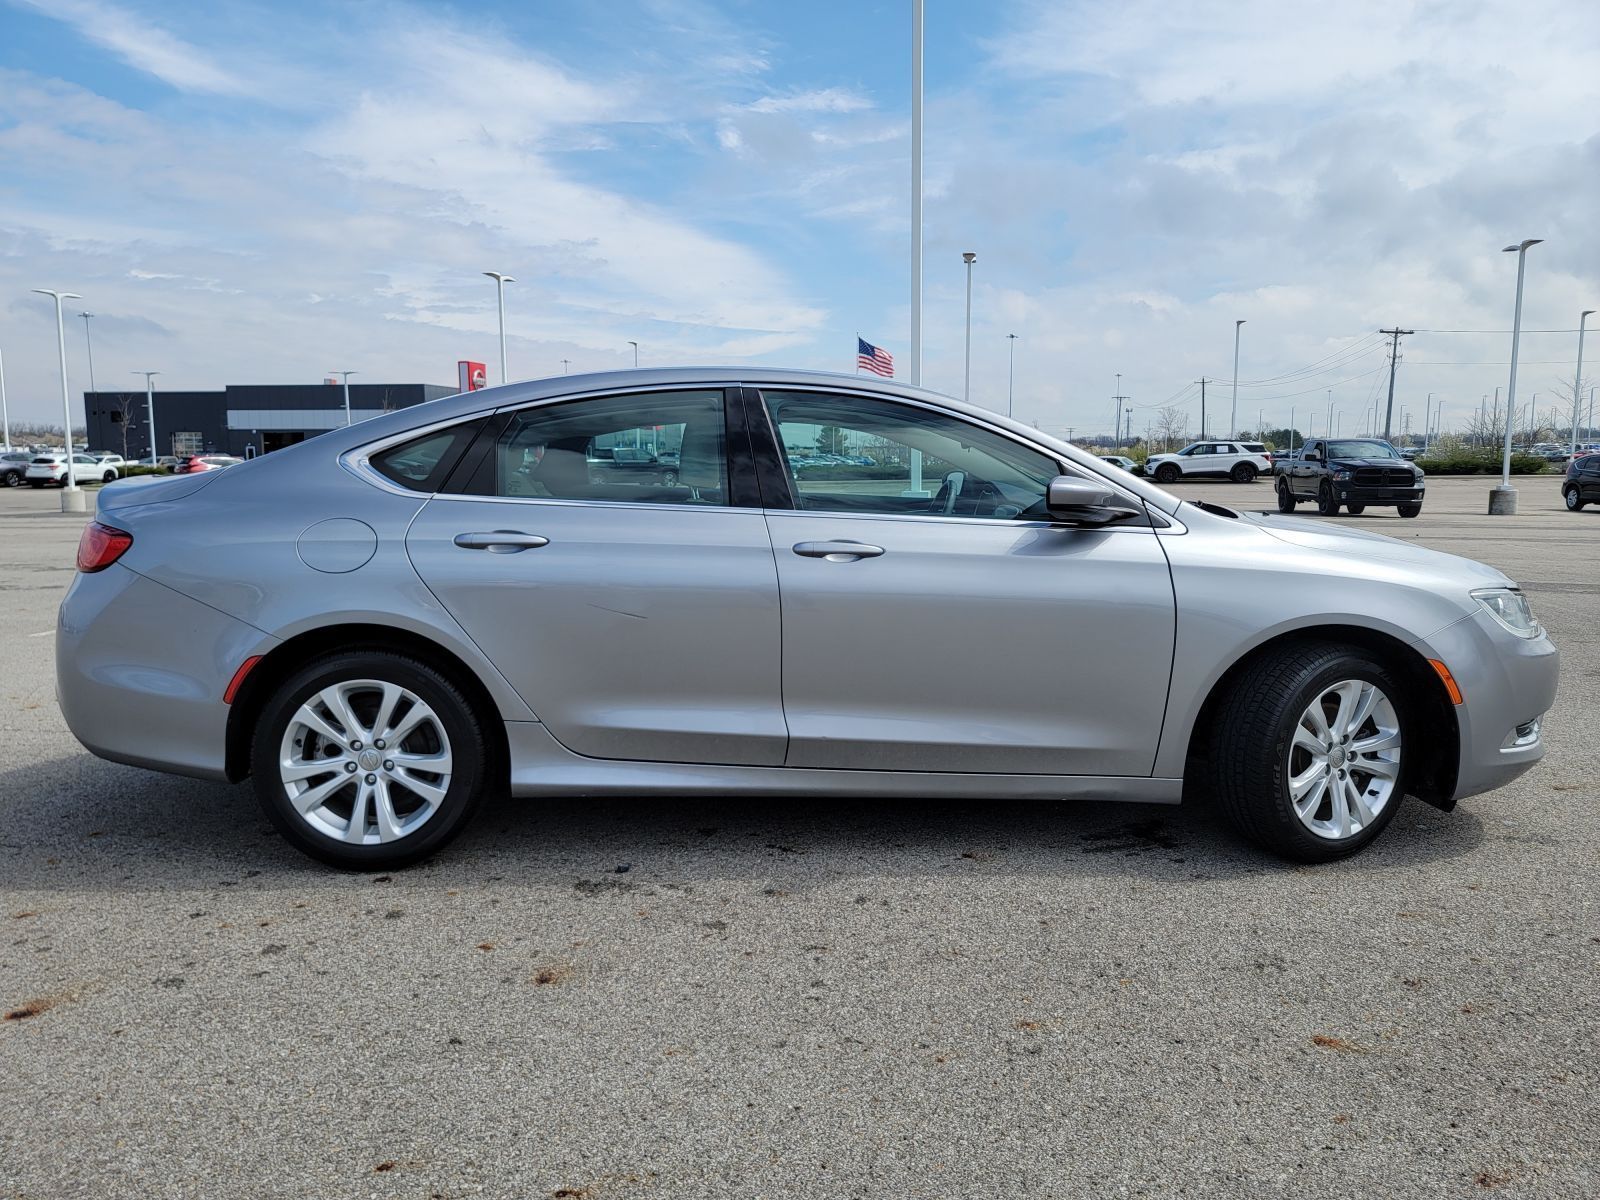 Used, 2015 Chrysler 200 Limited, Silver, P0499-8